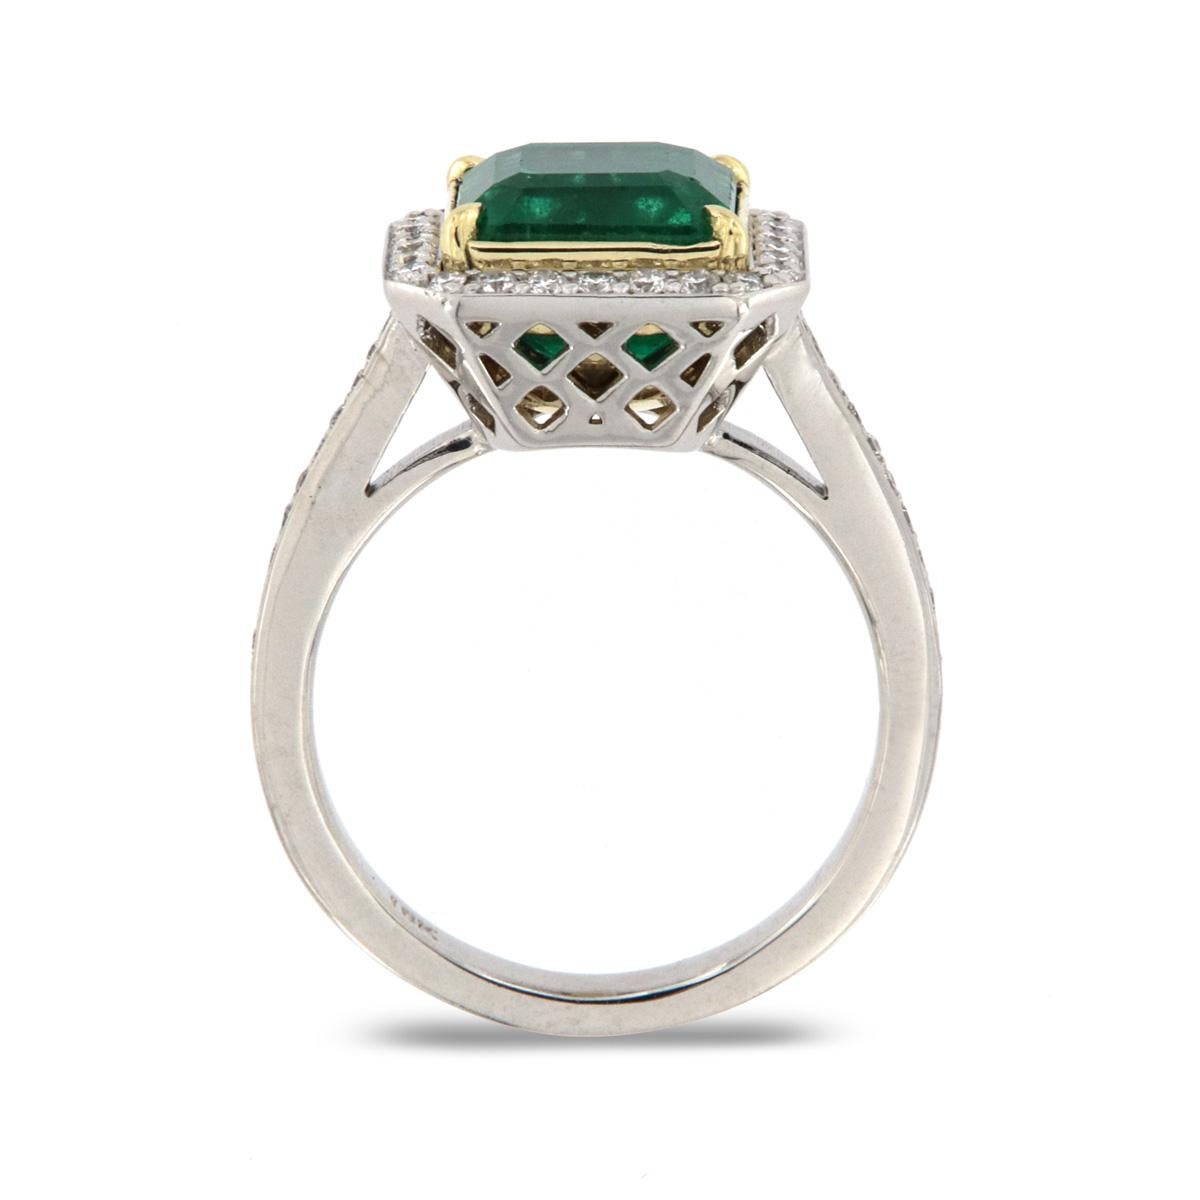 From our signature Gemstones collection of exquisite red carpet pieces, this handcrafted 18k Two-Tone gold ring is centering a 3.56 Carat of top quality Ethiopian square green emerald in premium luster encircled by a halo of brilliant round